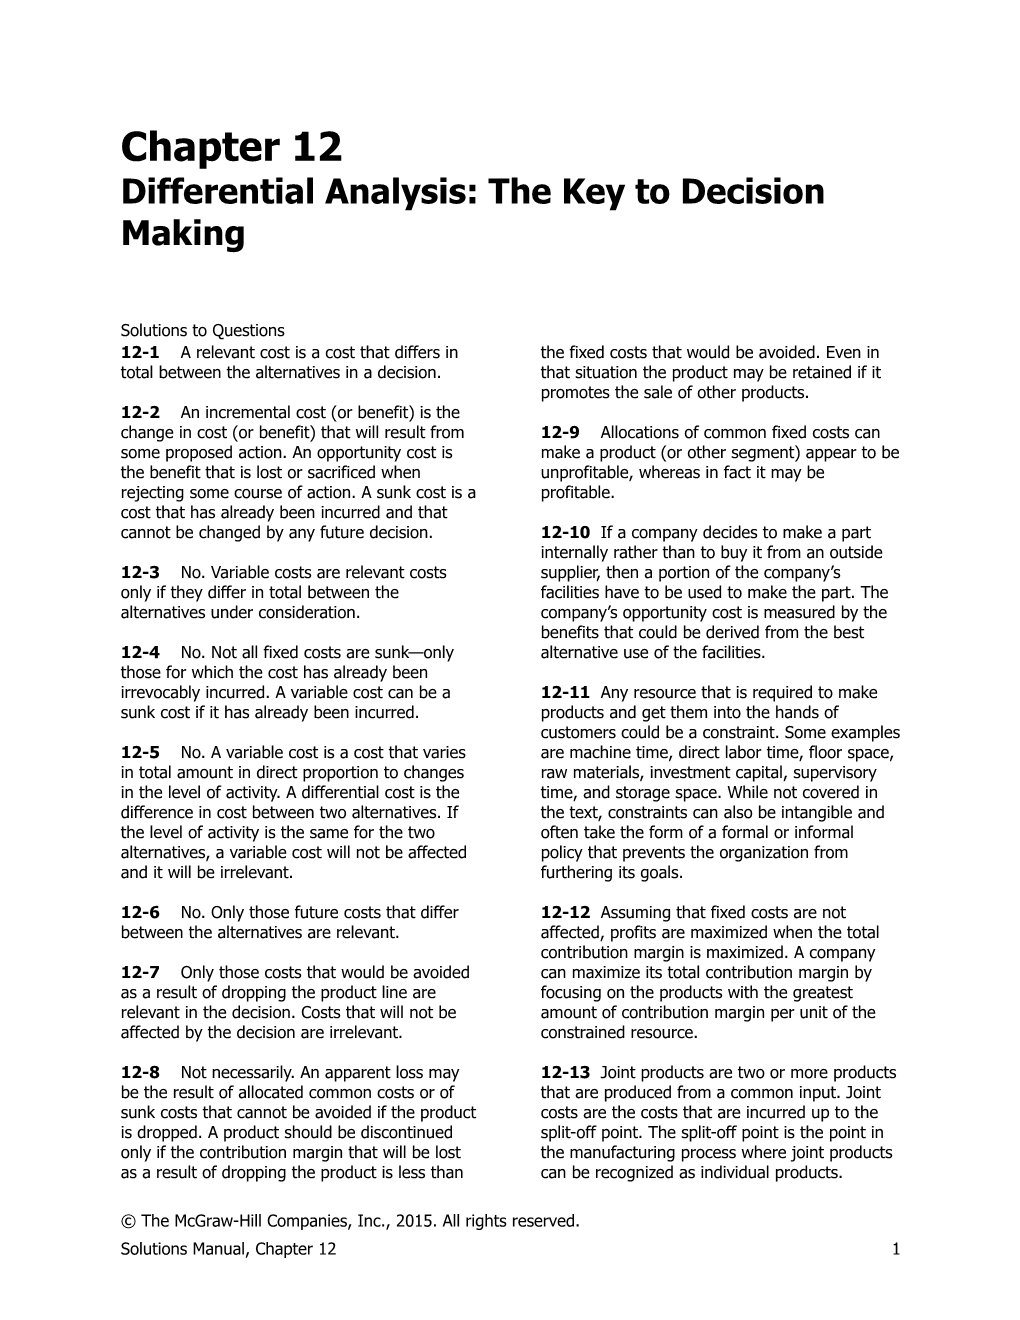 Differential Analysis: the Key to Decision Making